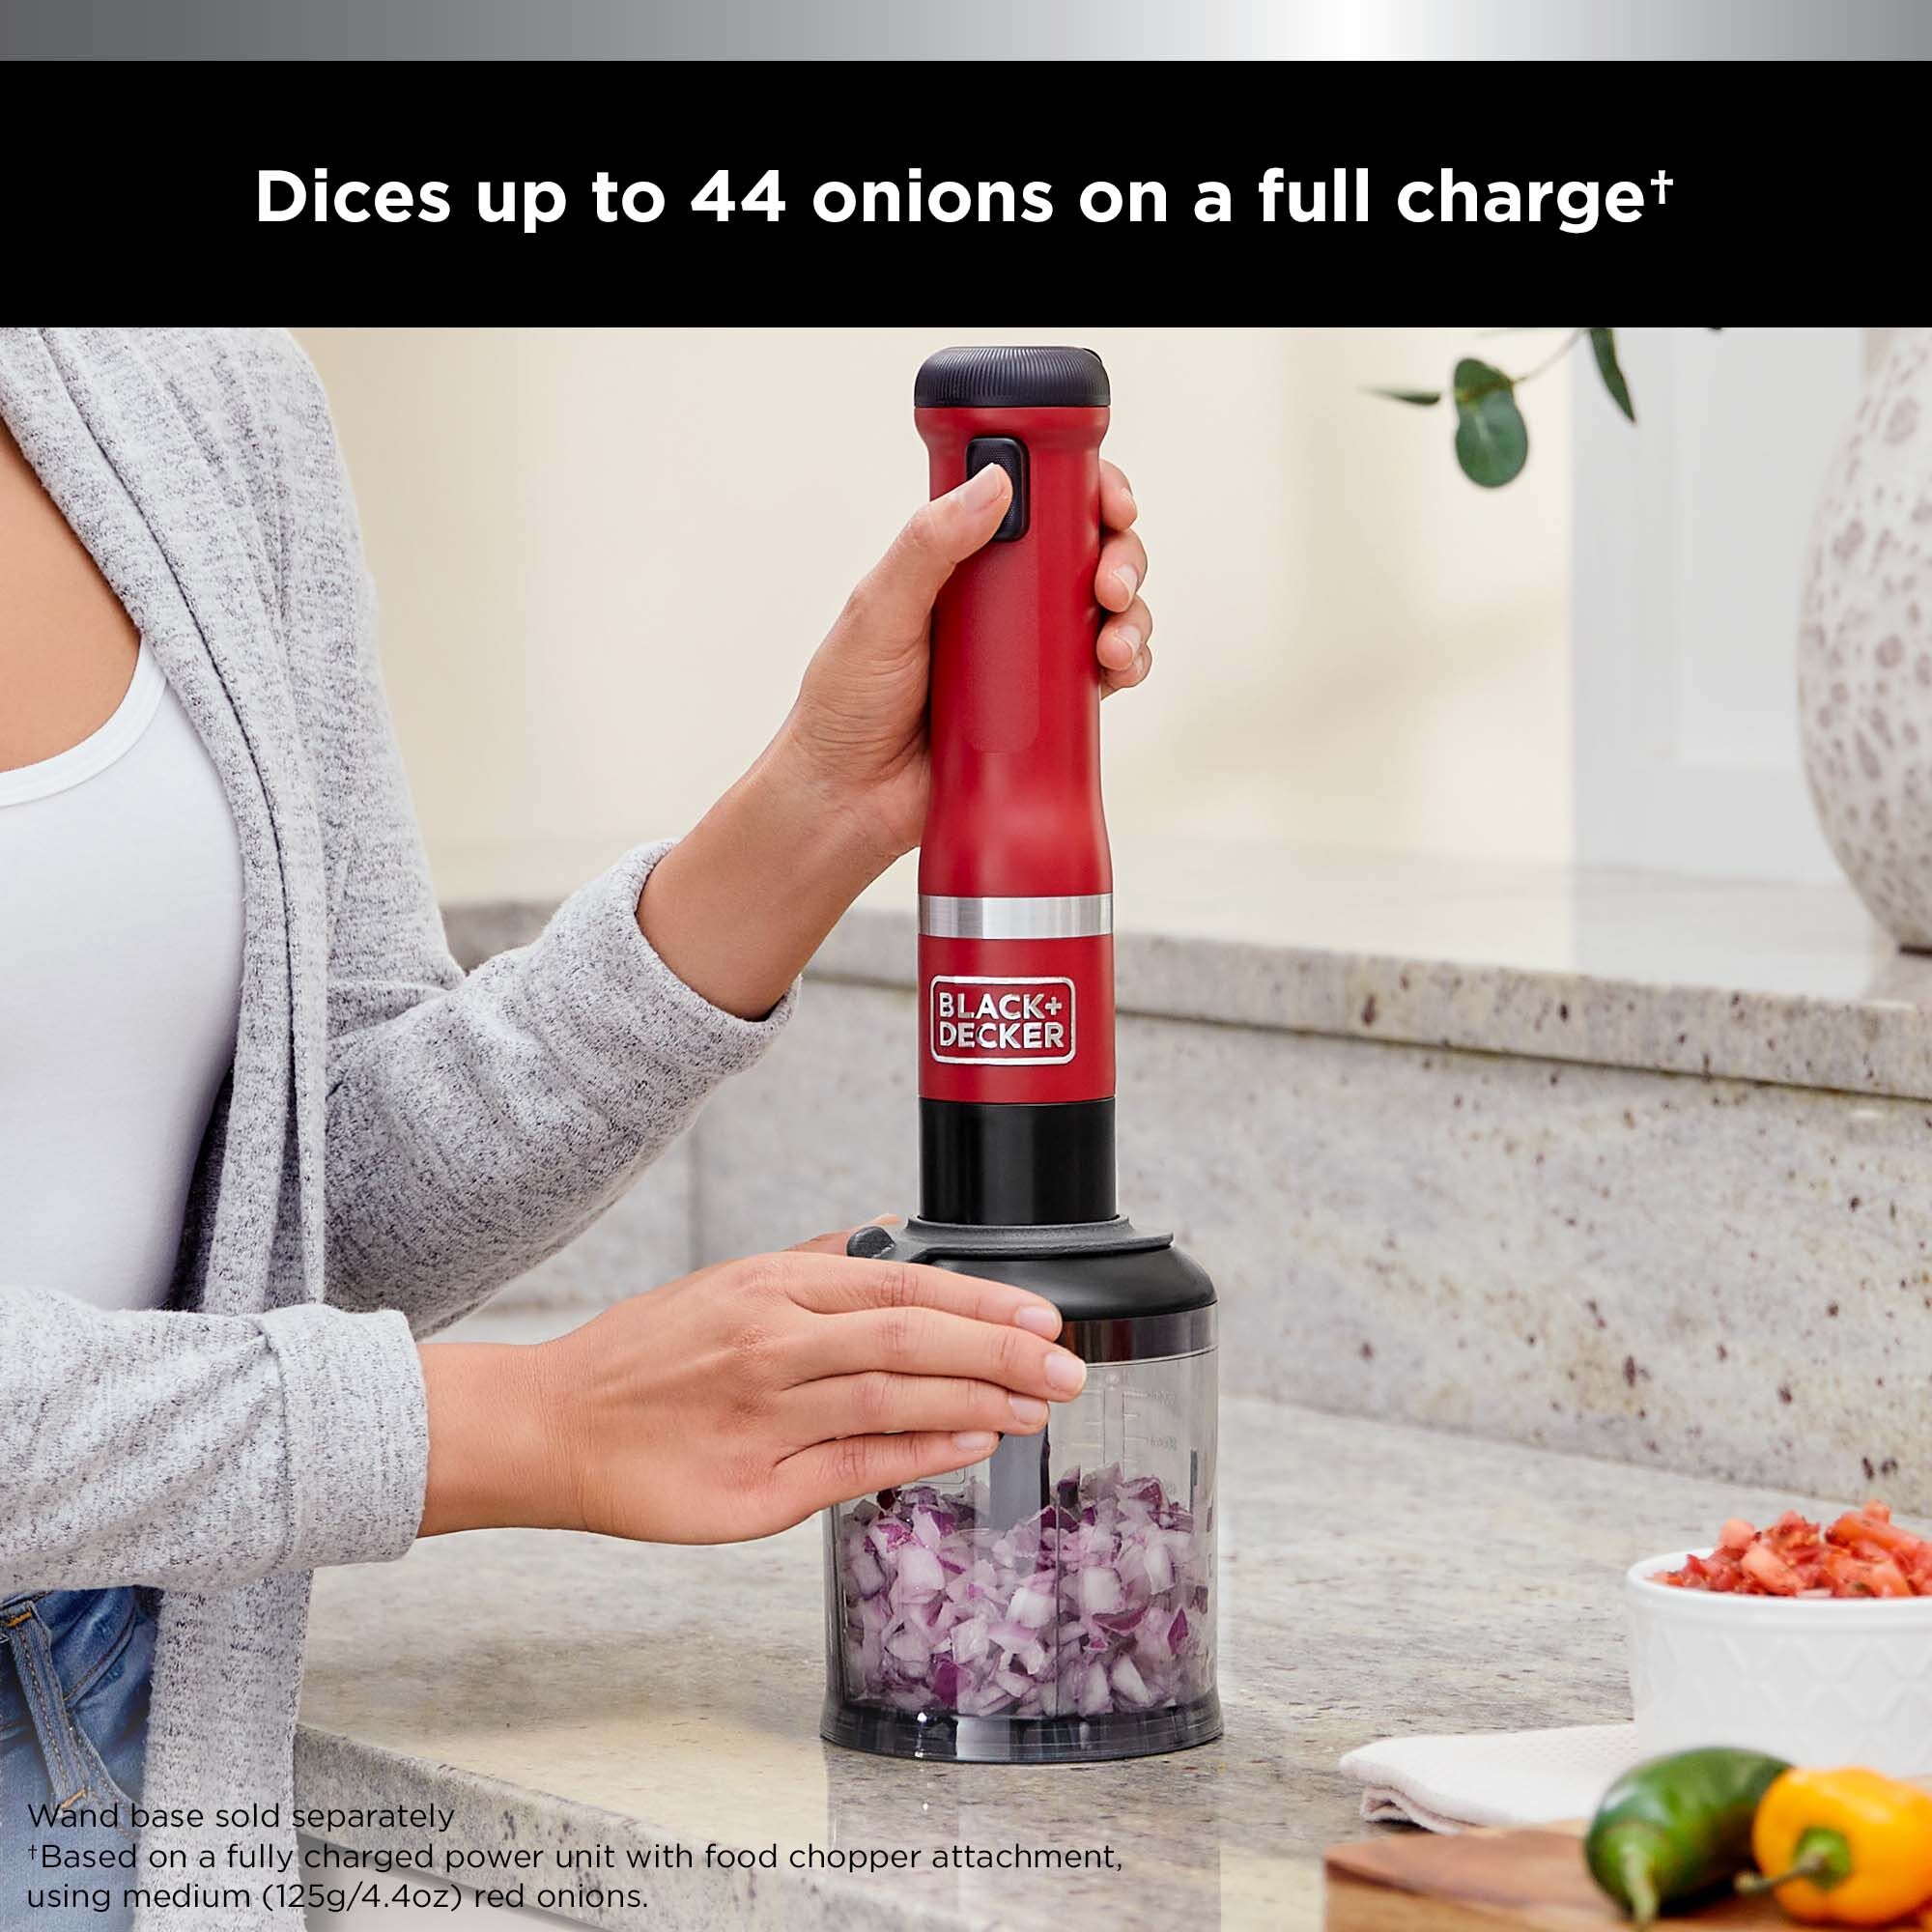 The BLACK+DECKER kitchen wand™ food chopper attachment can duce up to 44 onions on a full charge, talent showing attachment with the red wand base